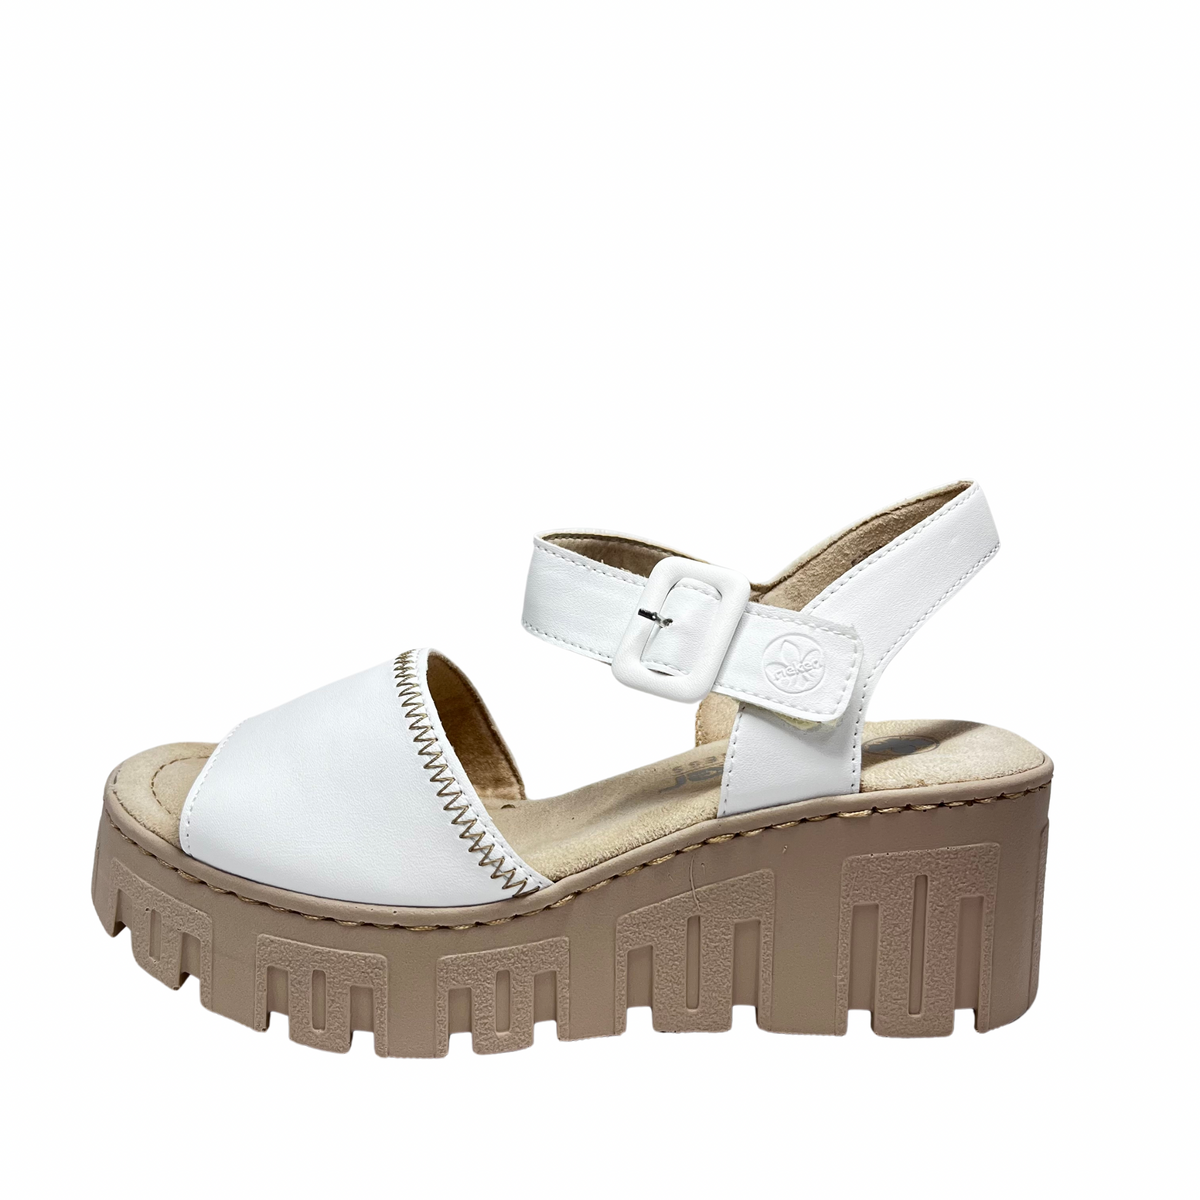 Rieker White and Beige Wedged Sandal